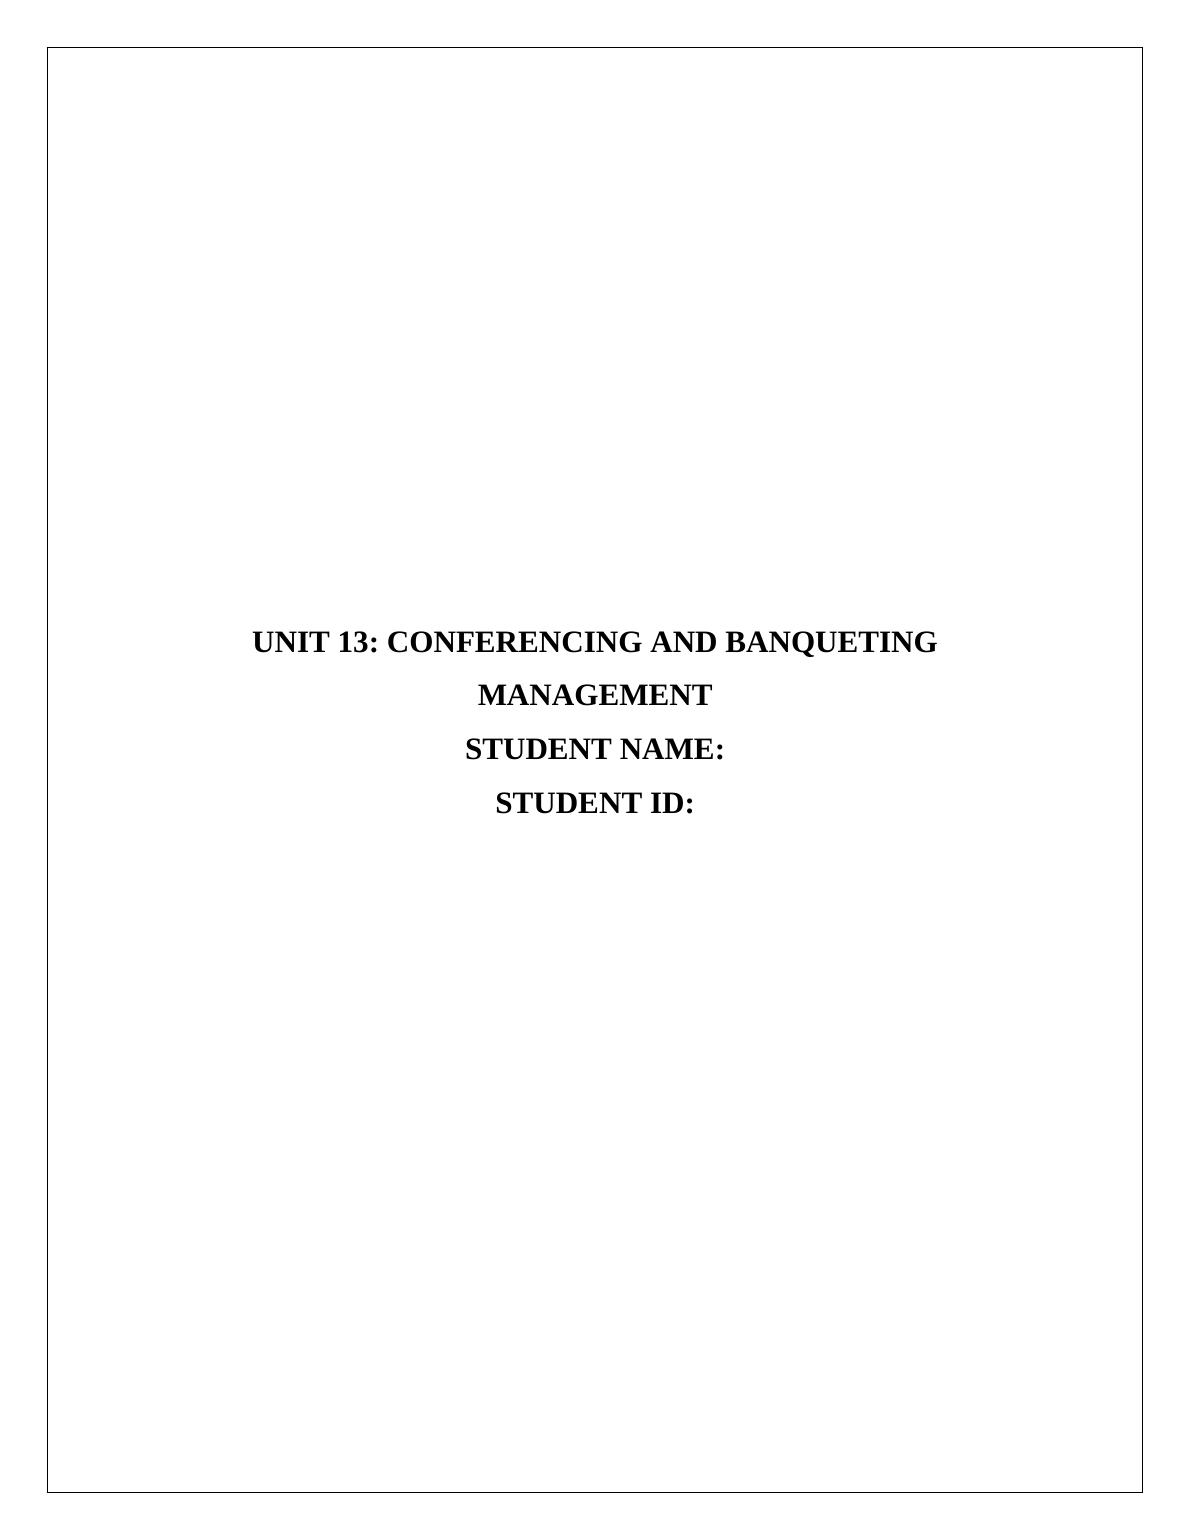 UNIT 13: Conferencing and Banqueting Management_1